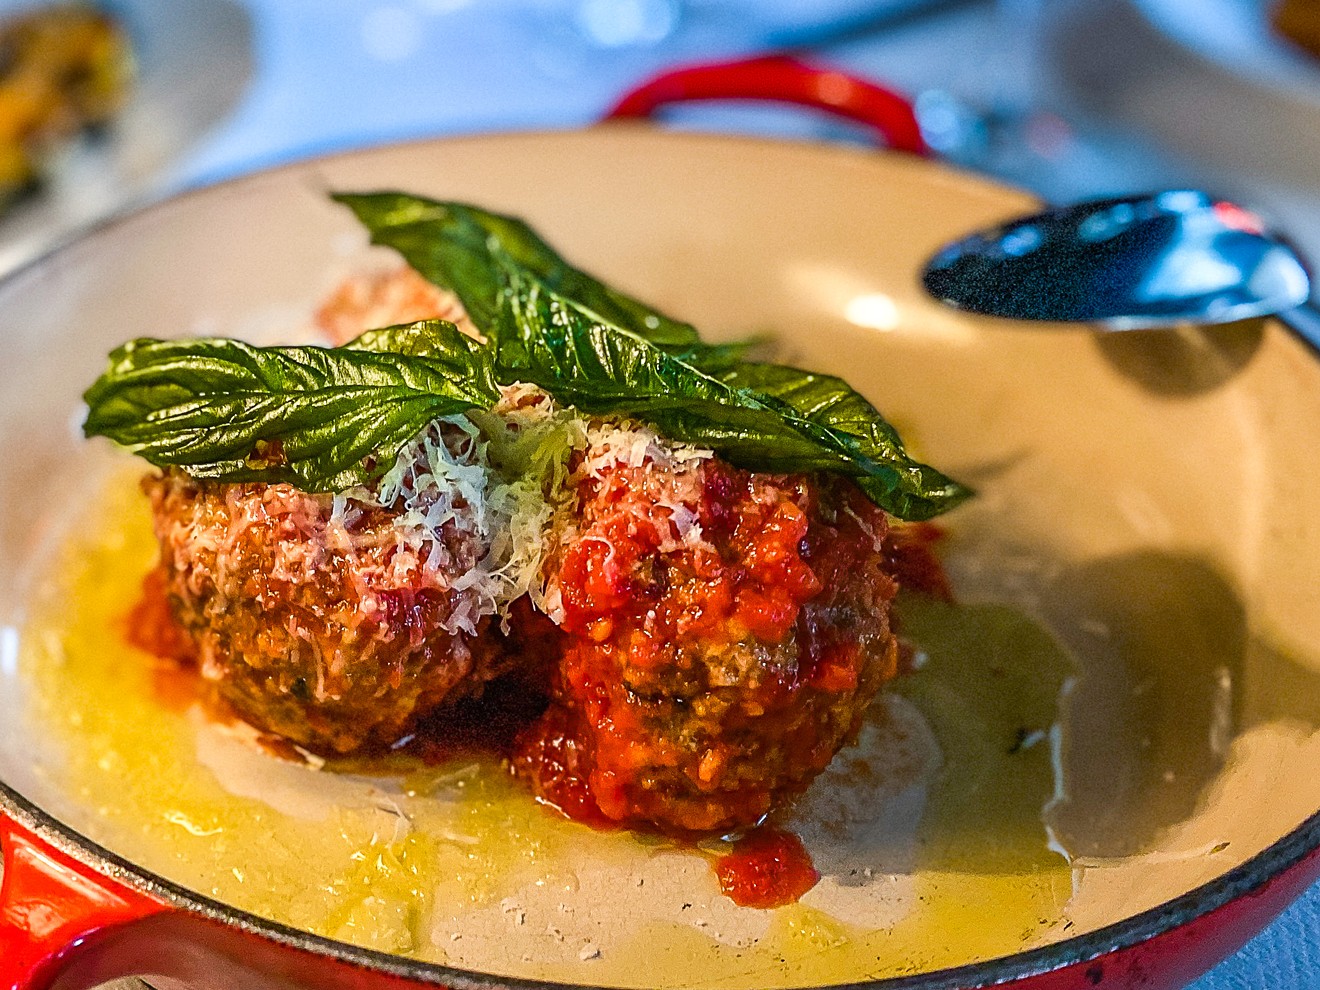 Wonderfully prepared pork meatballs that might make your nonna proud.